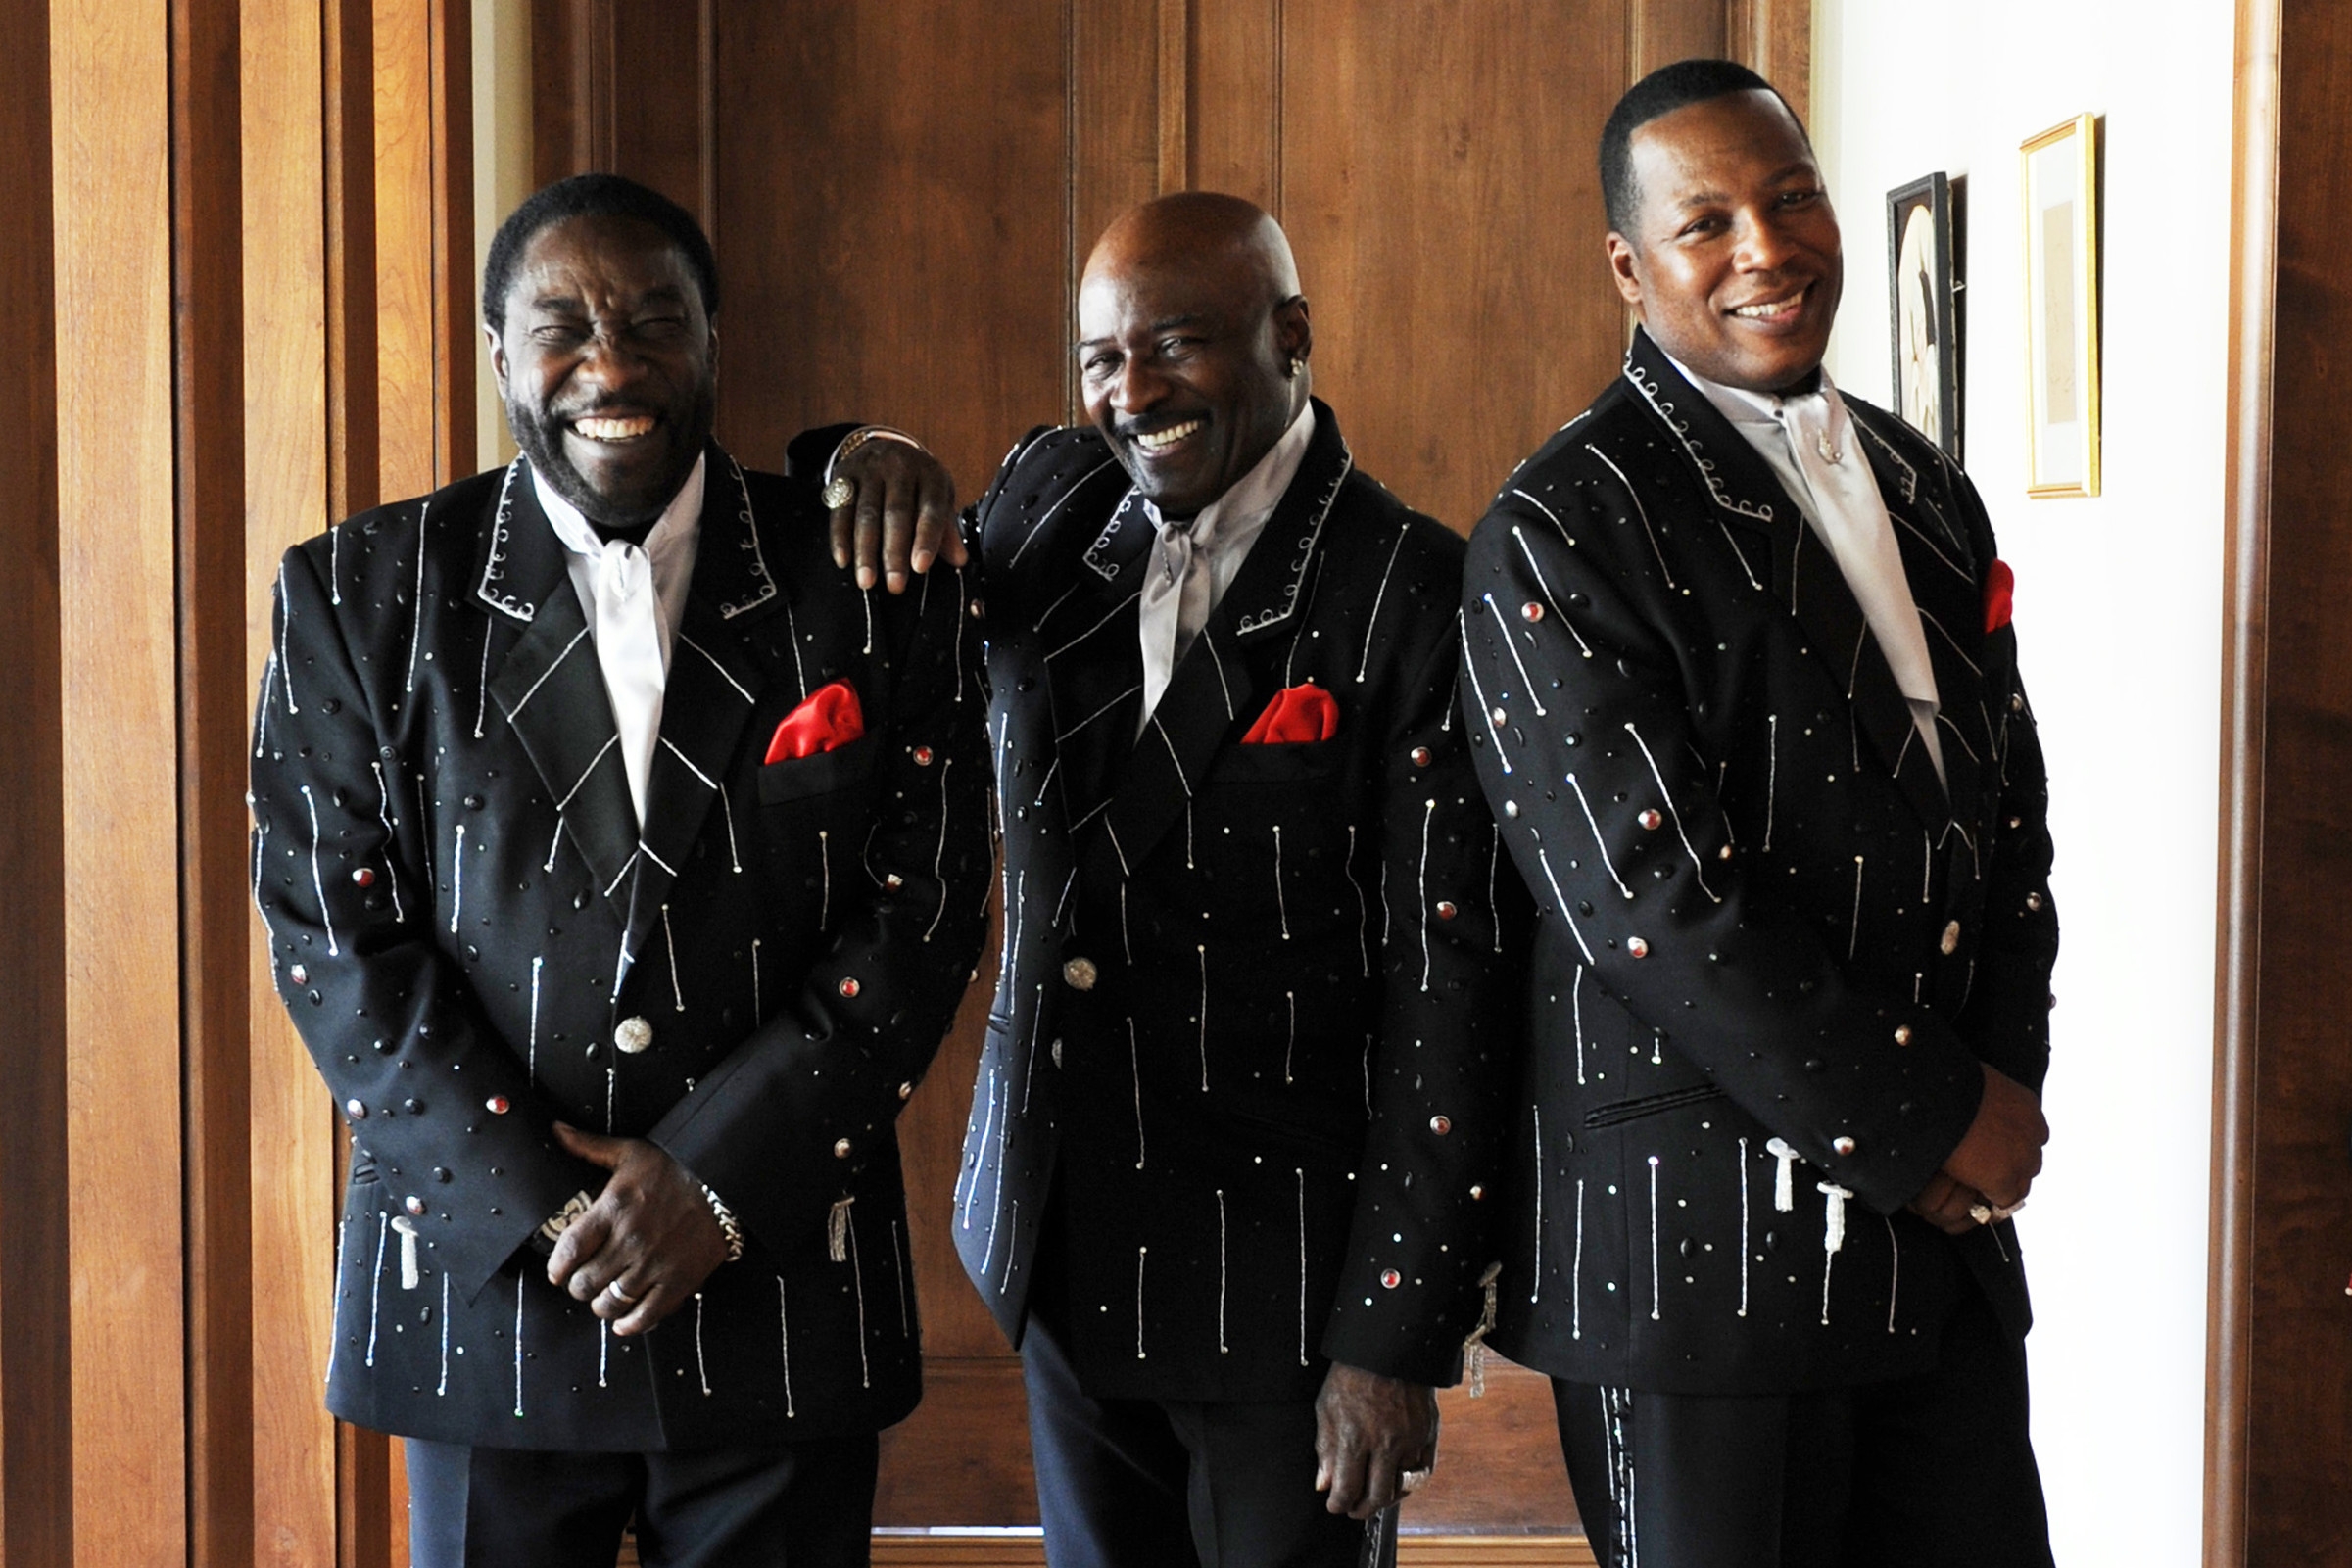 The O’Jays Give the People What They Want…for the Last Time